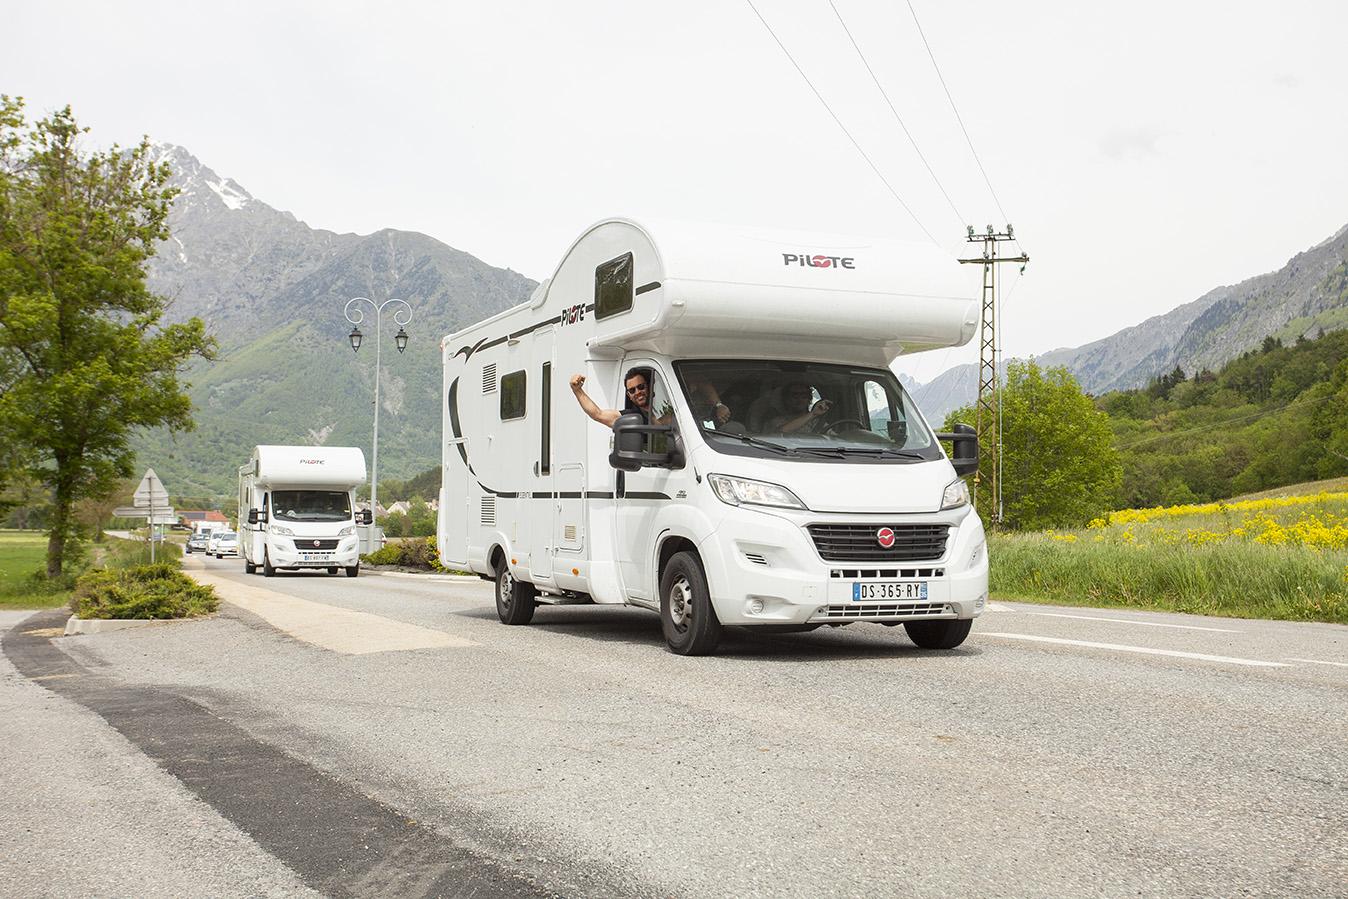 Renting or buying a motorhome? – image 1